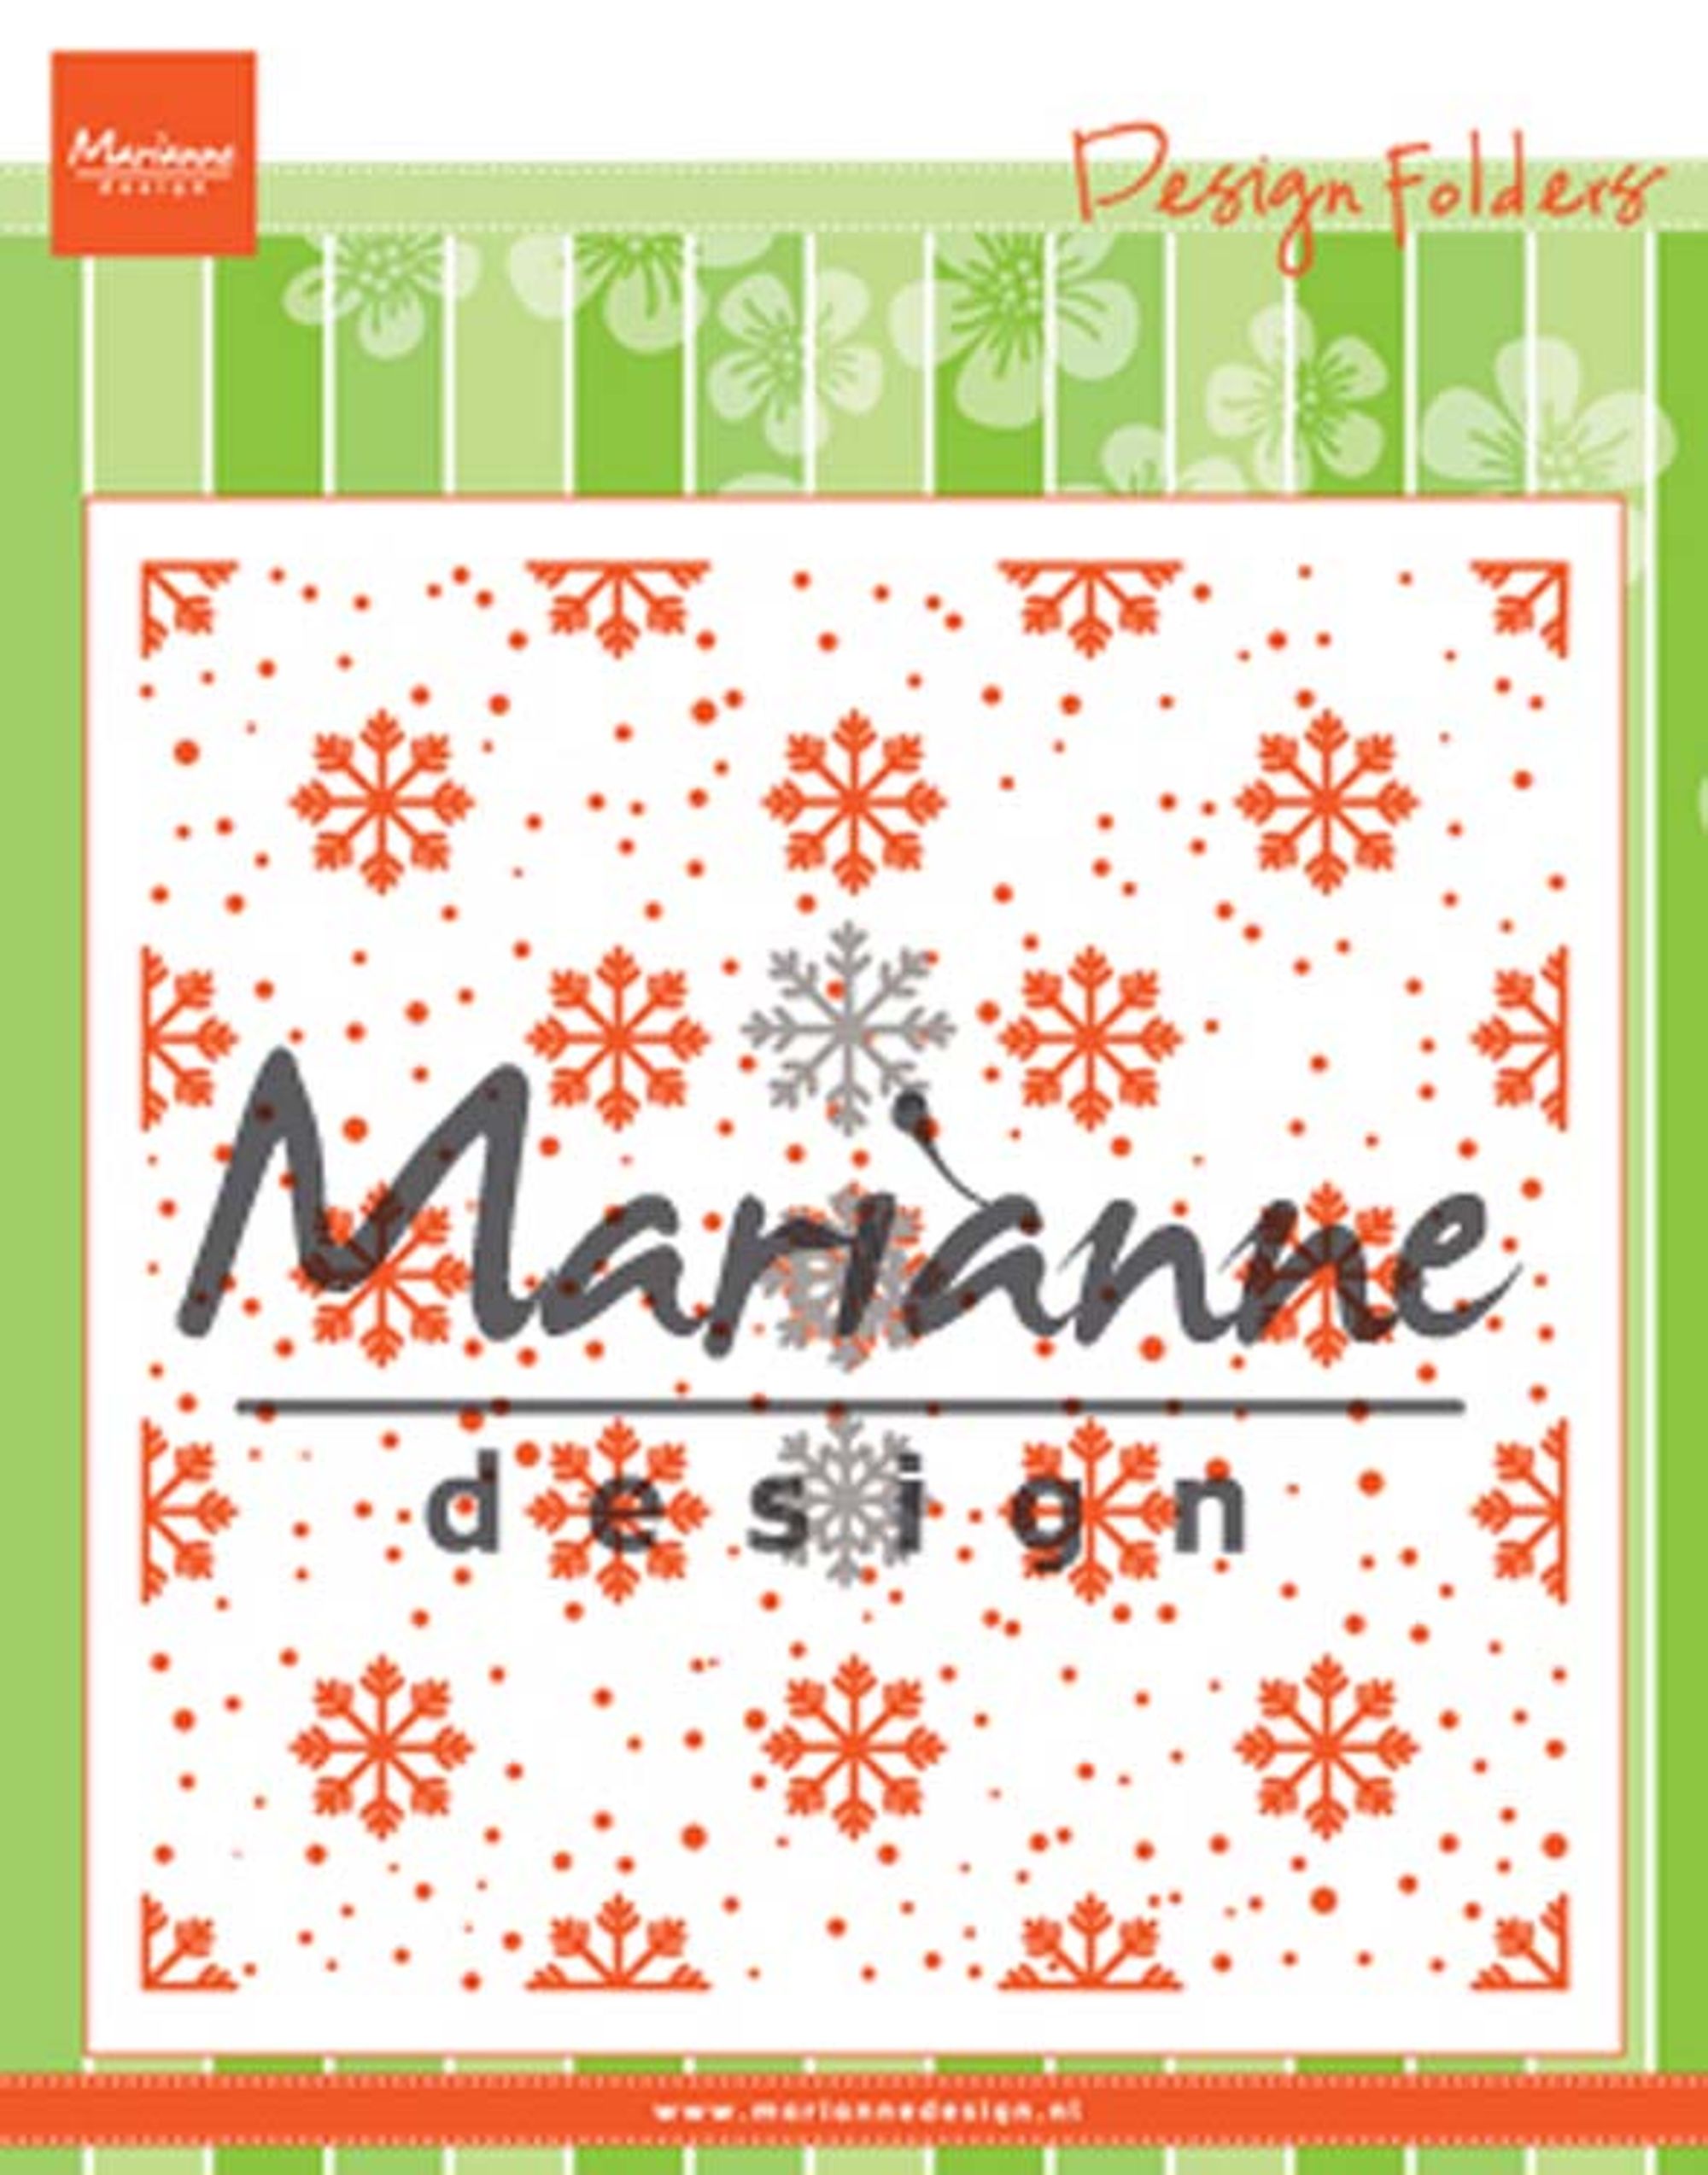 Marianne Design Embossing Folder Extra - Snow And Ice Crystals